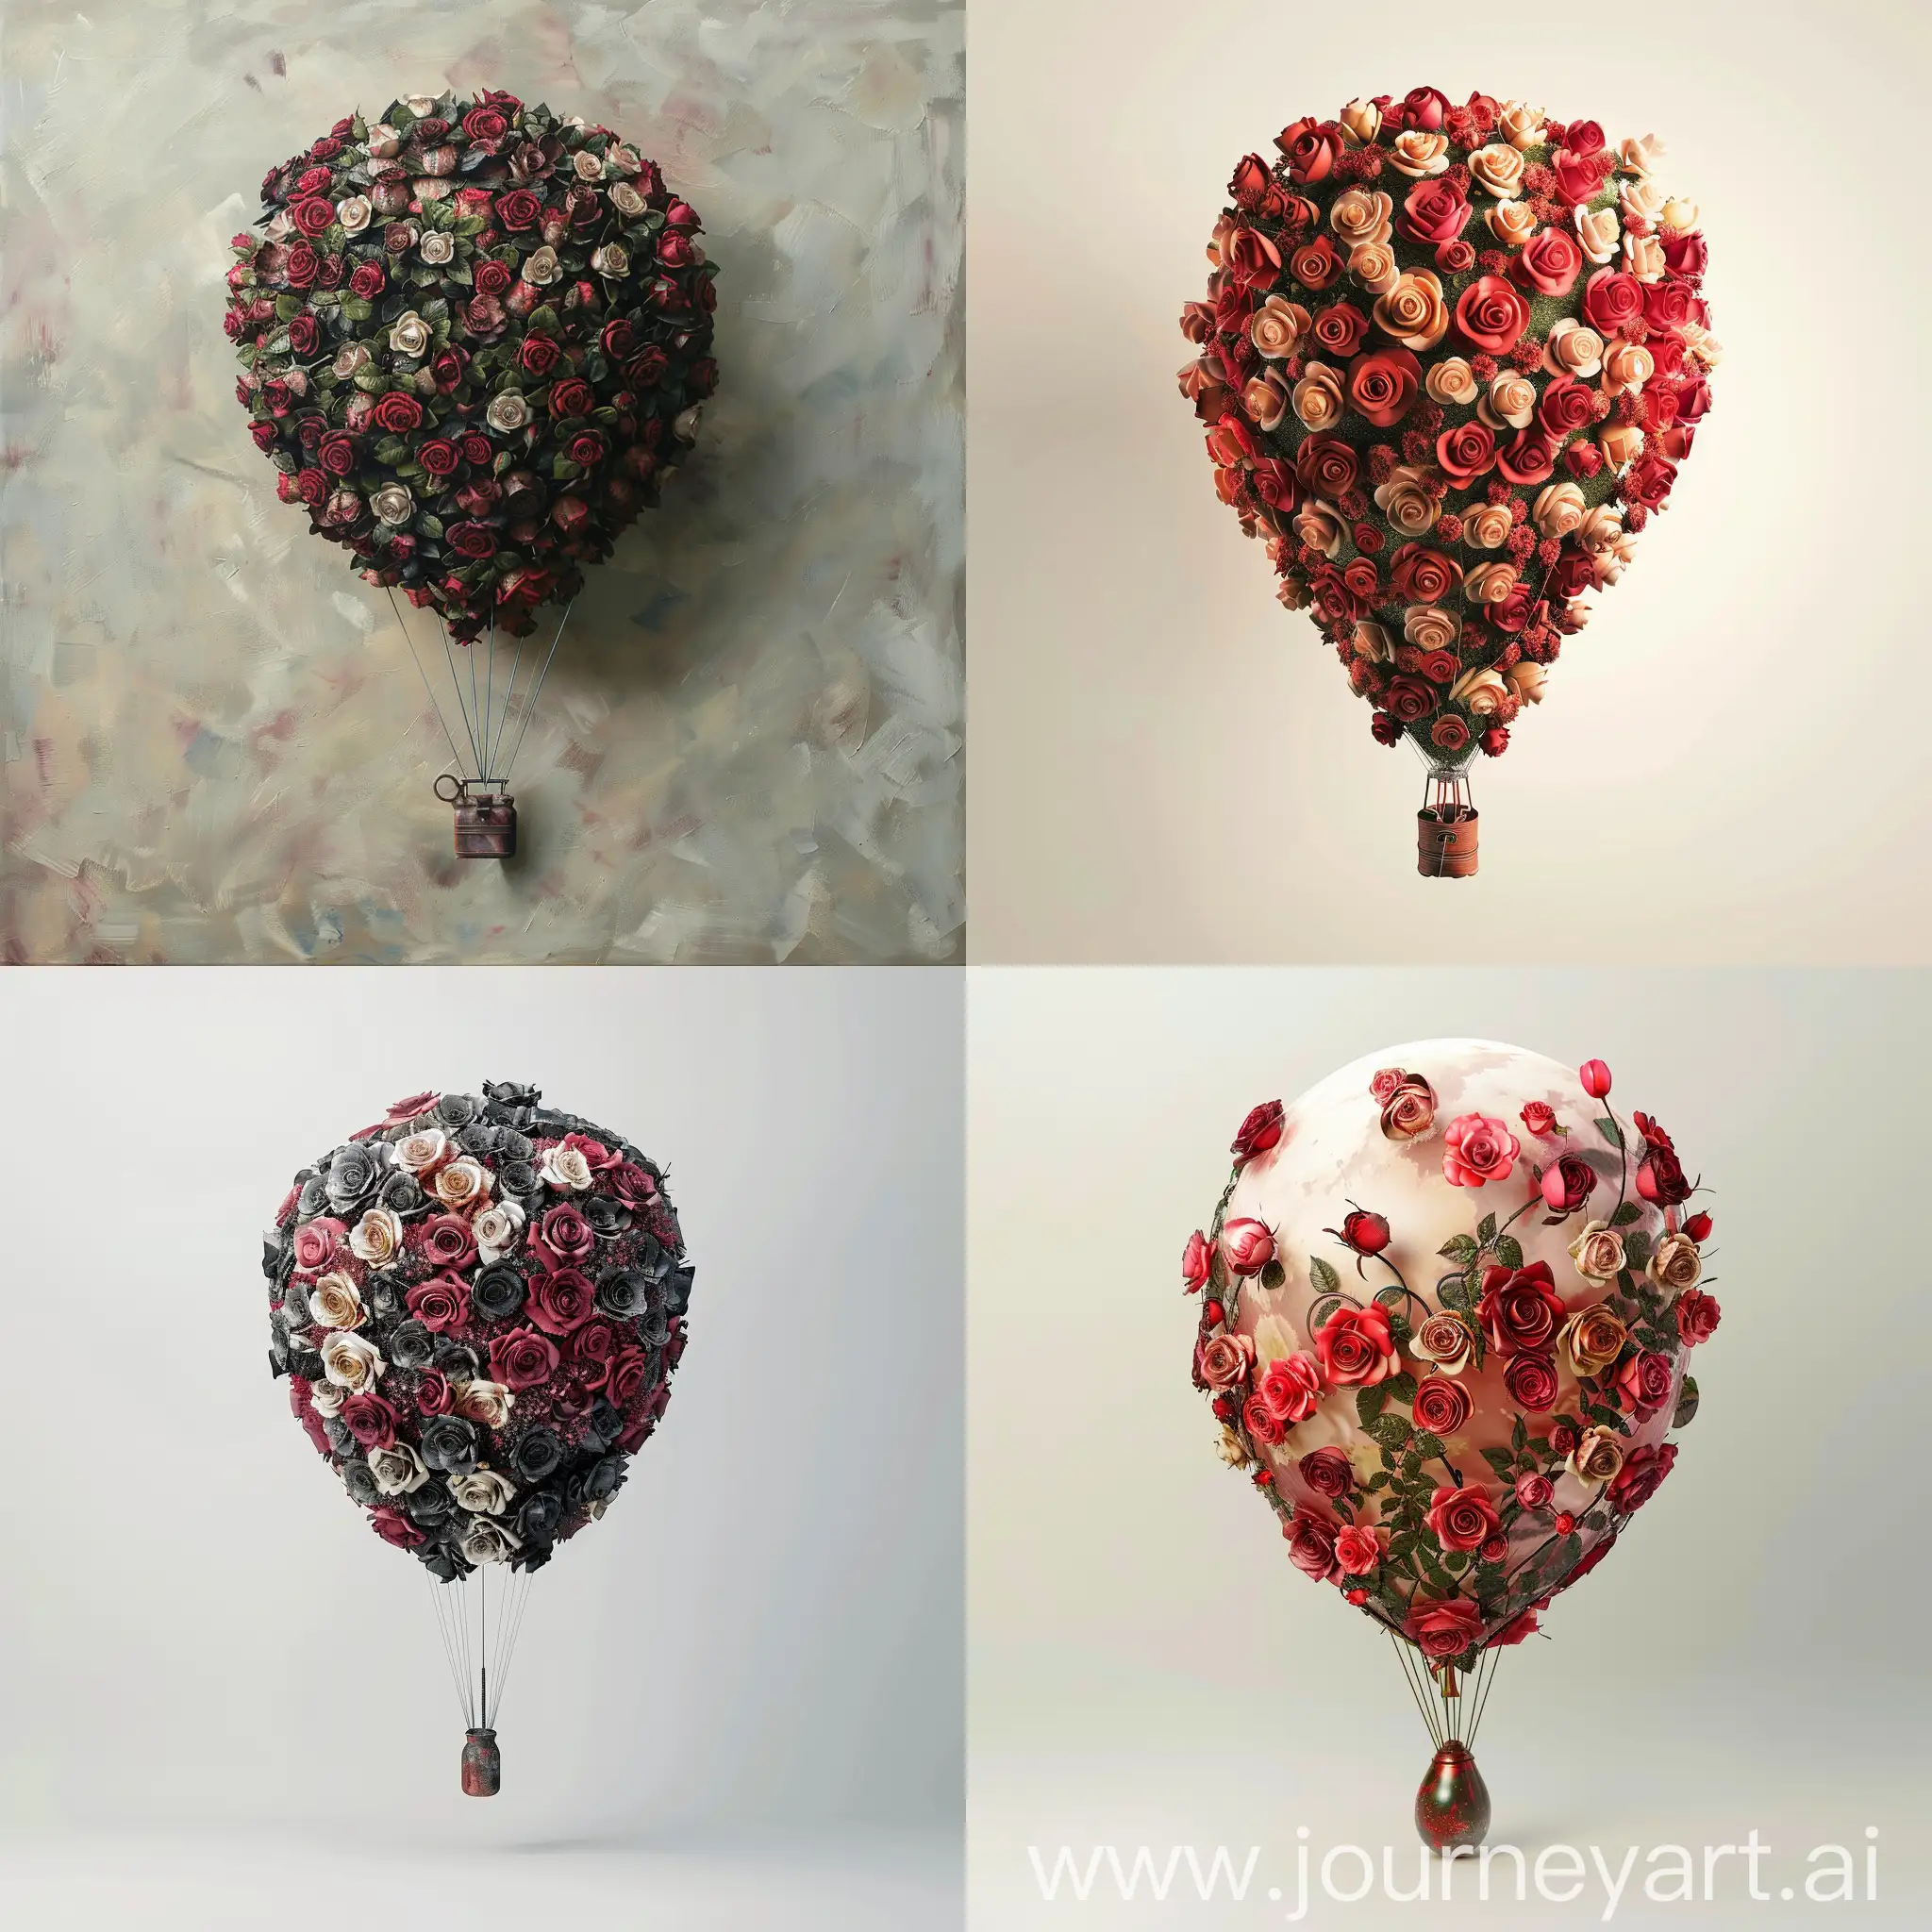 Colorful-Balloon-Crafted-from-Petals-and-Roses